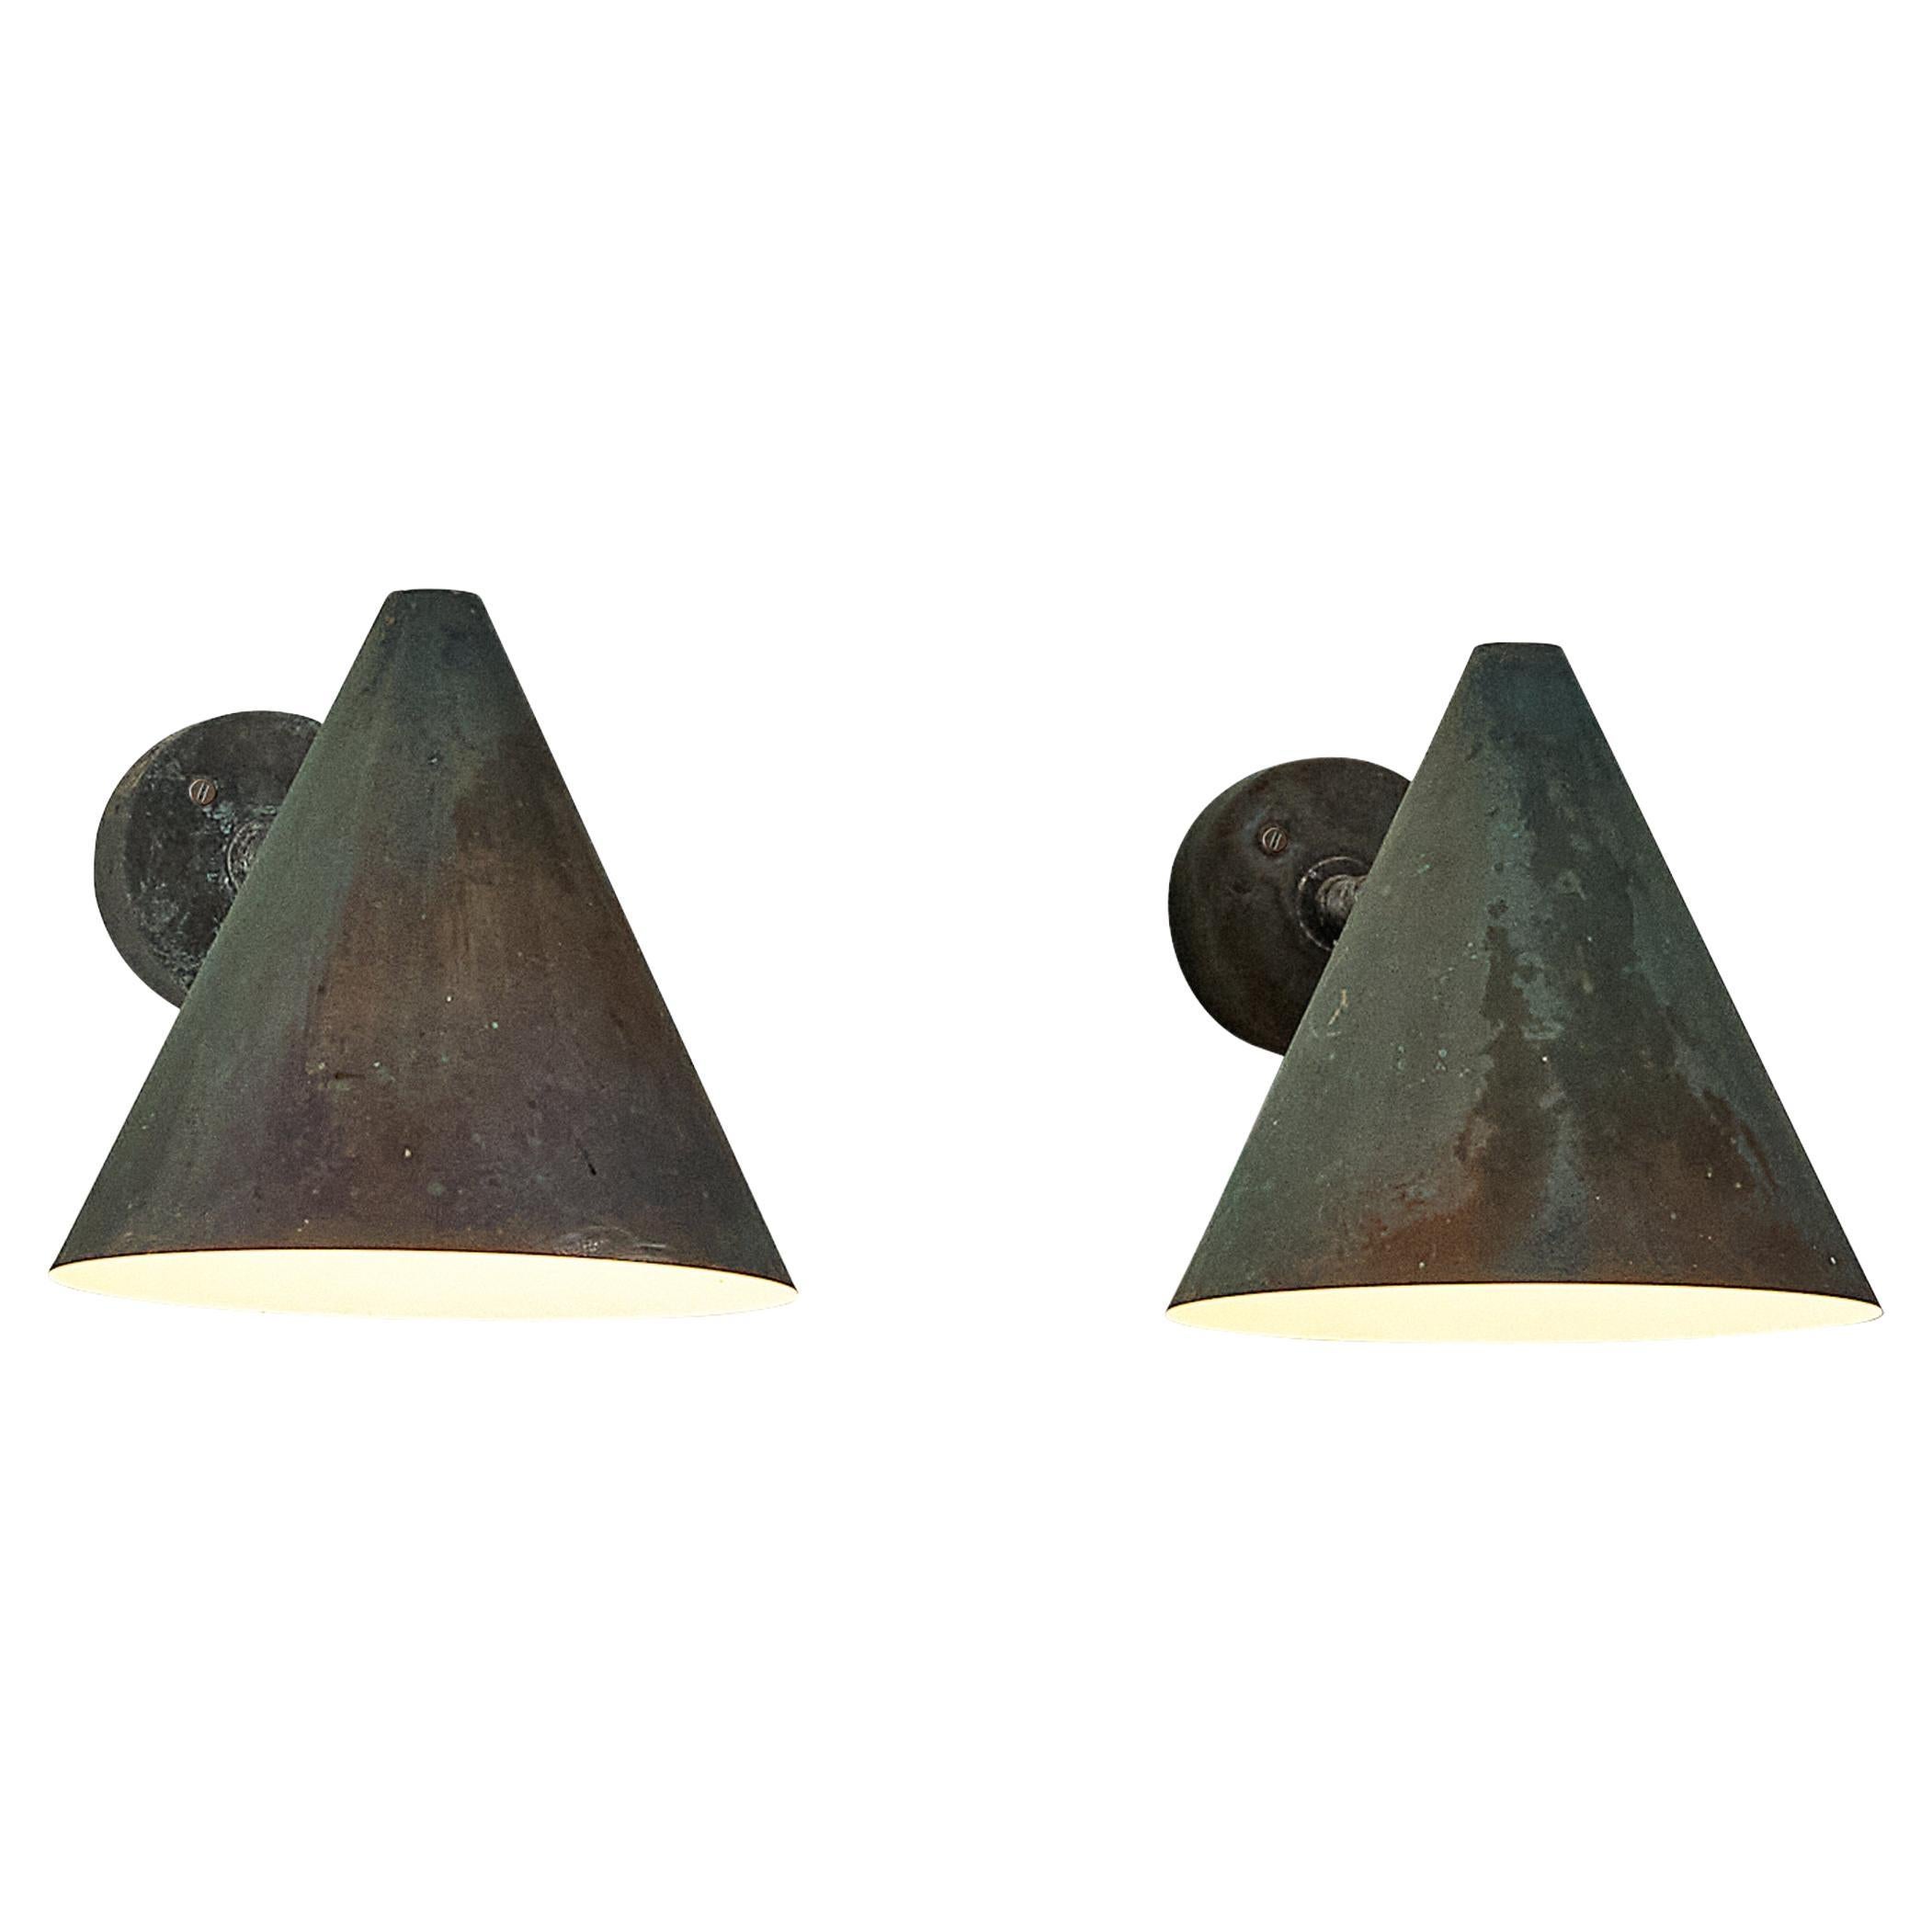  Hans-Agne Jakobsson 'Tratten' Wall Lights in Patinated Copper 